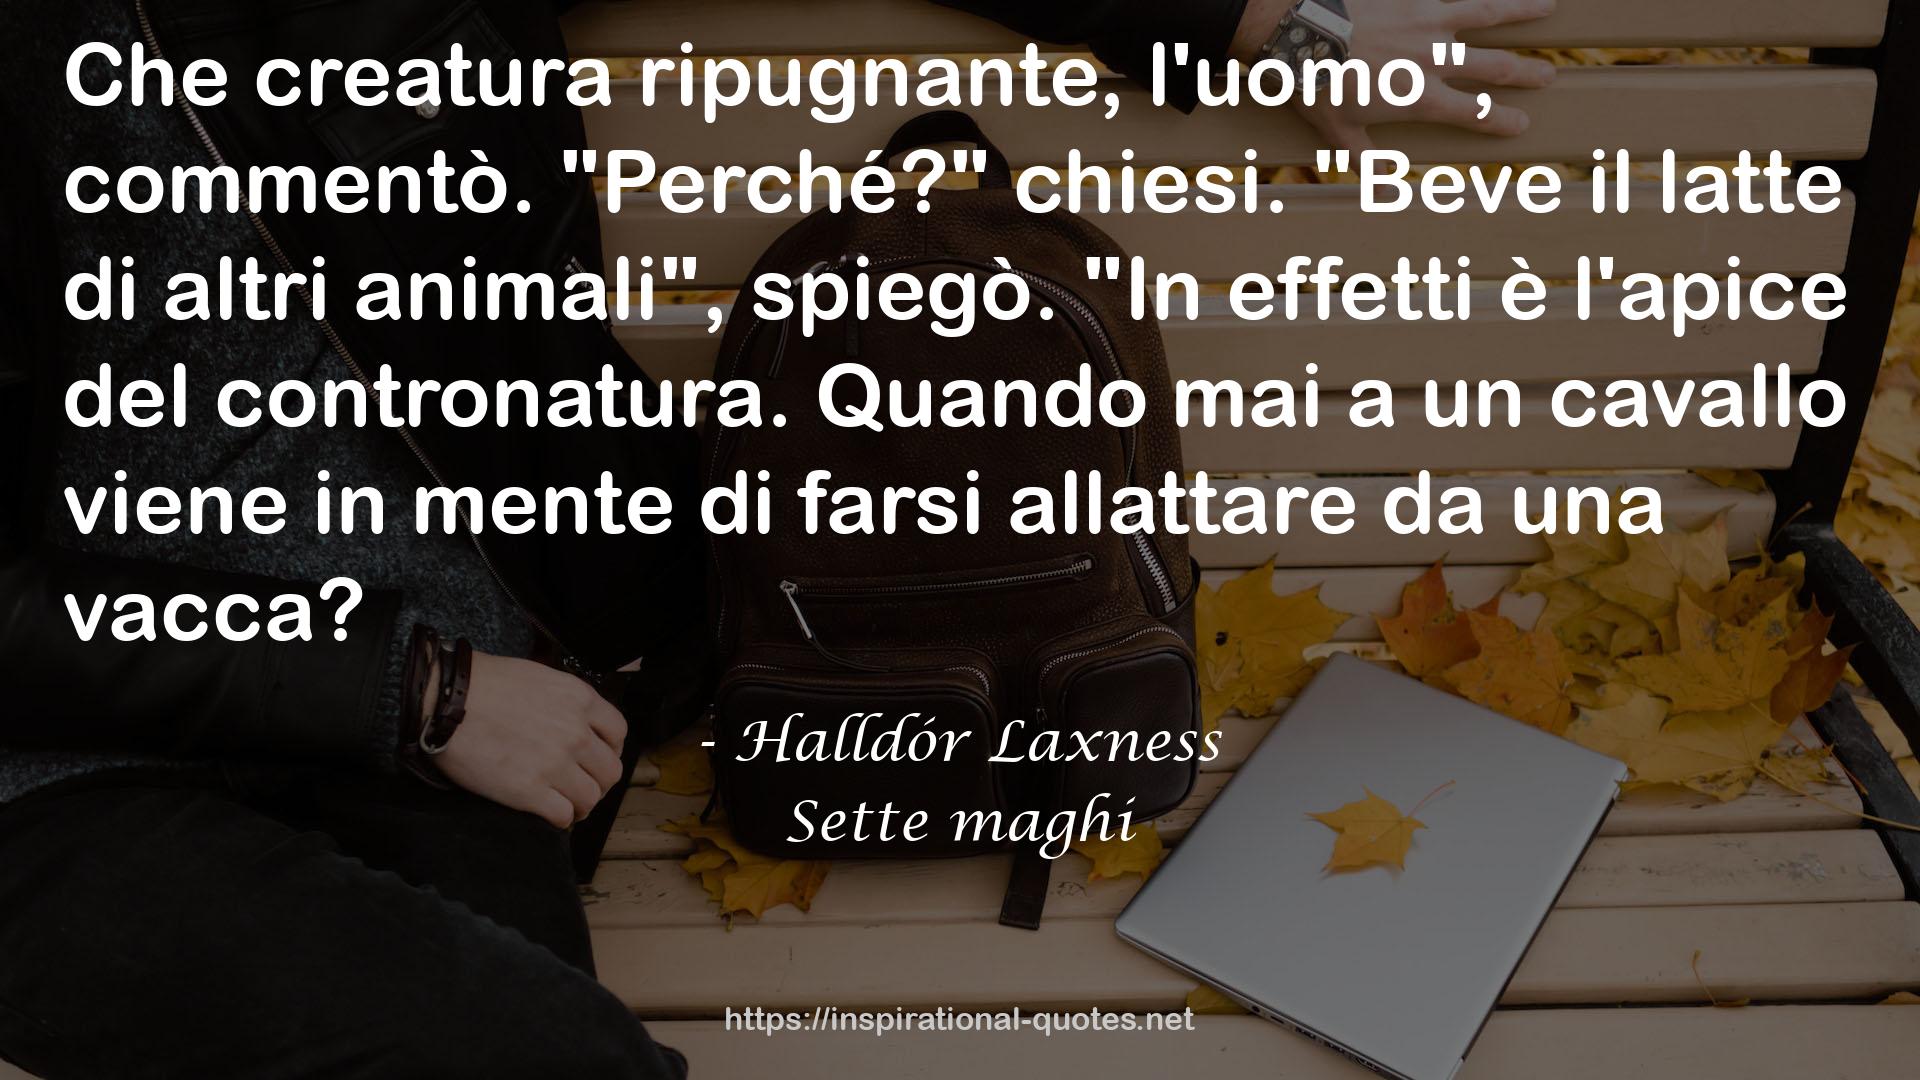 Sette maghi QUOTES